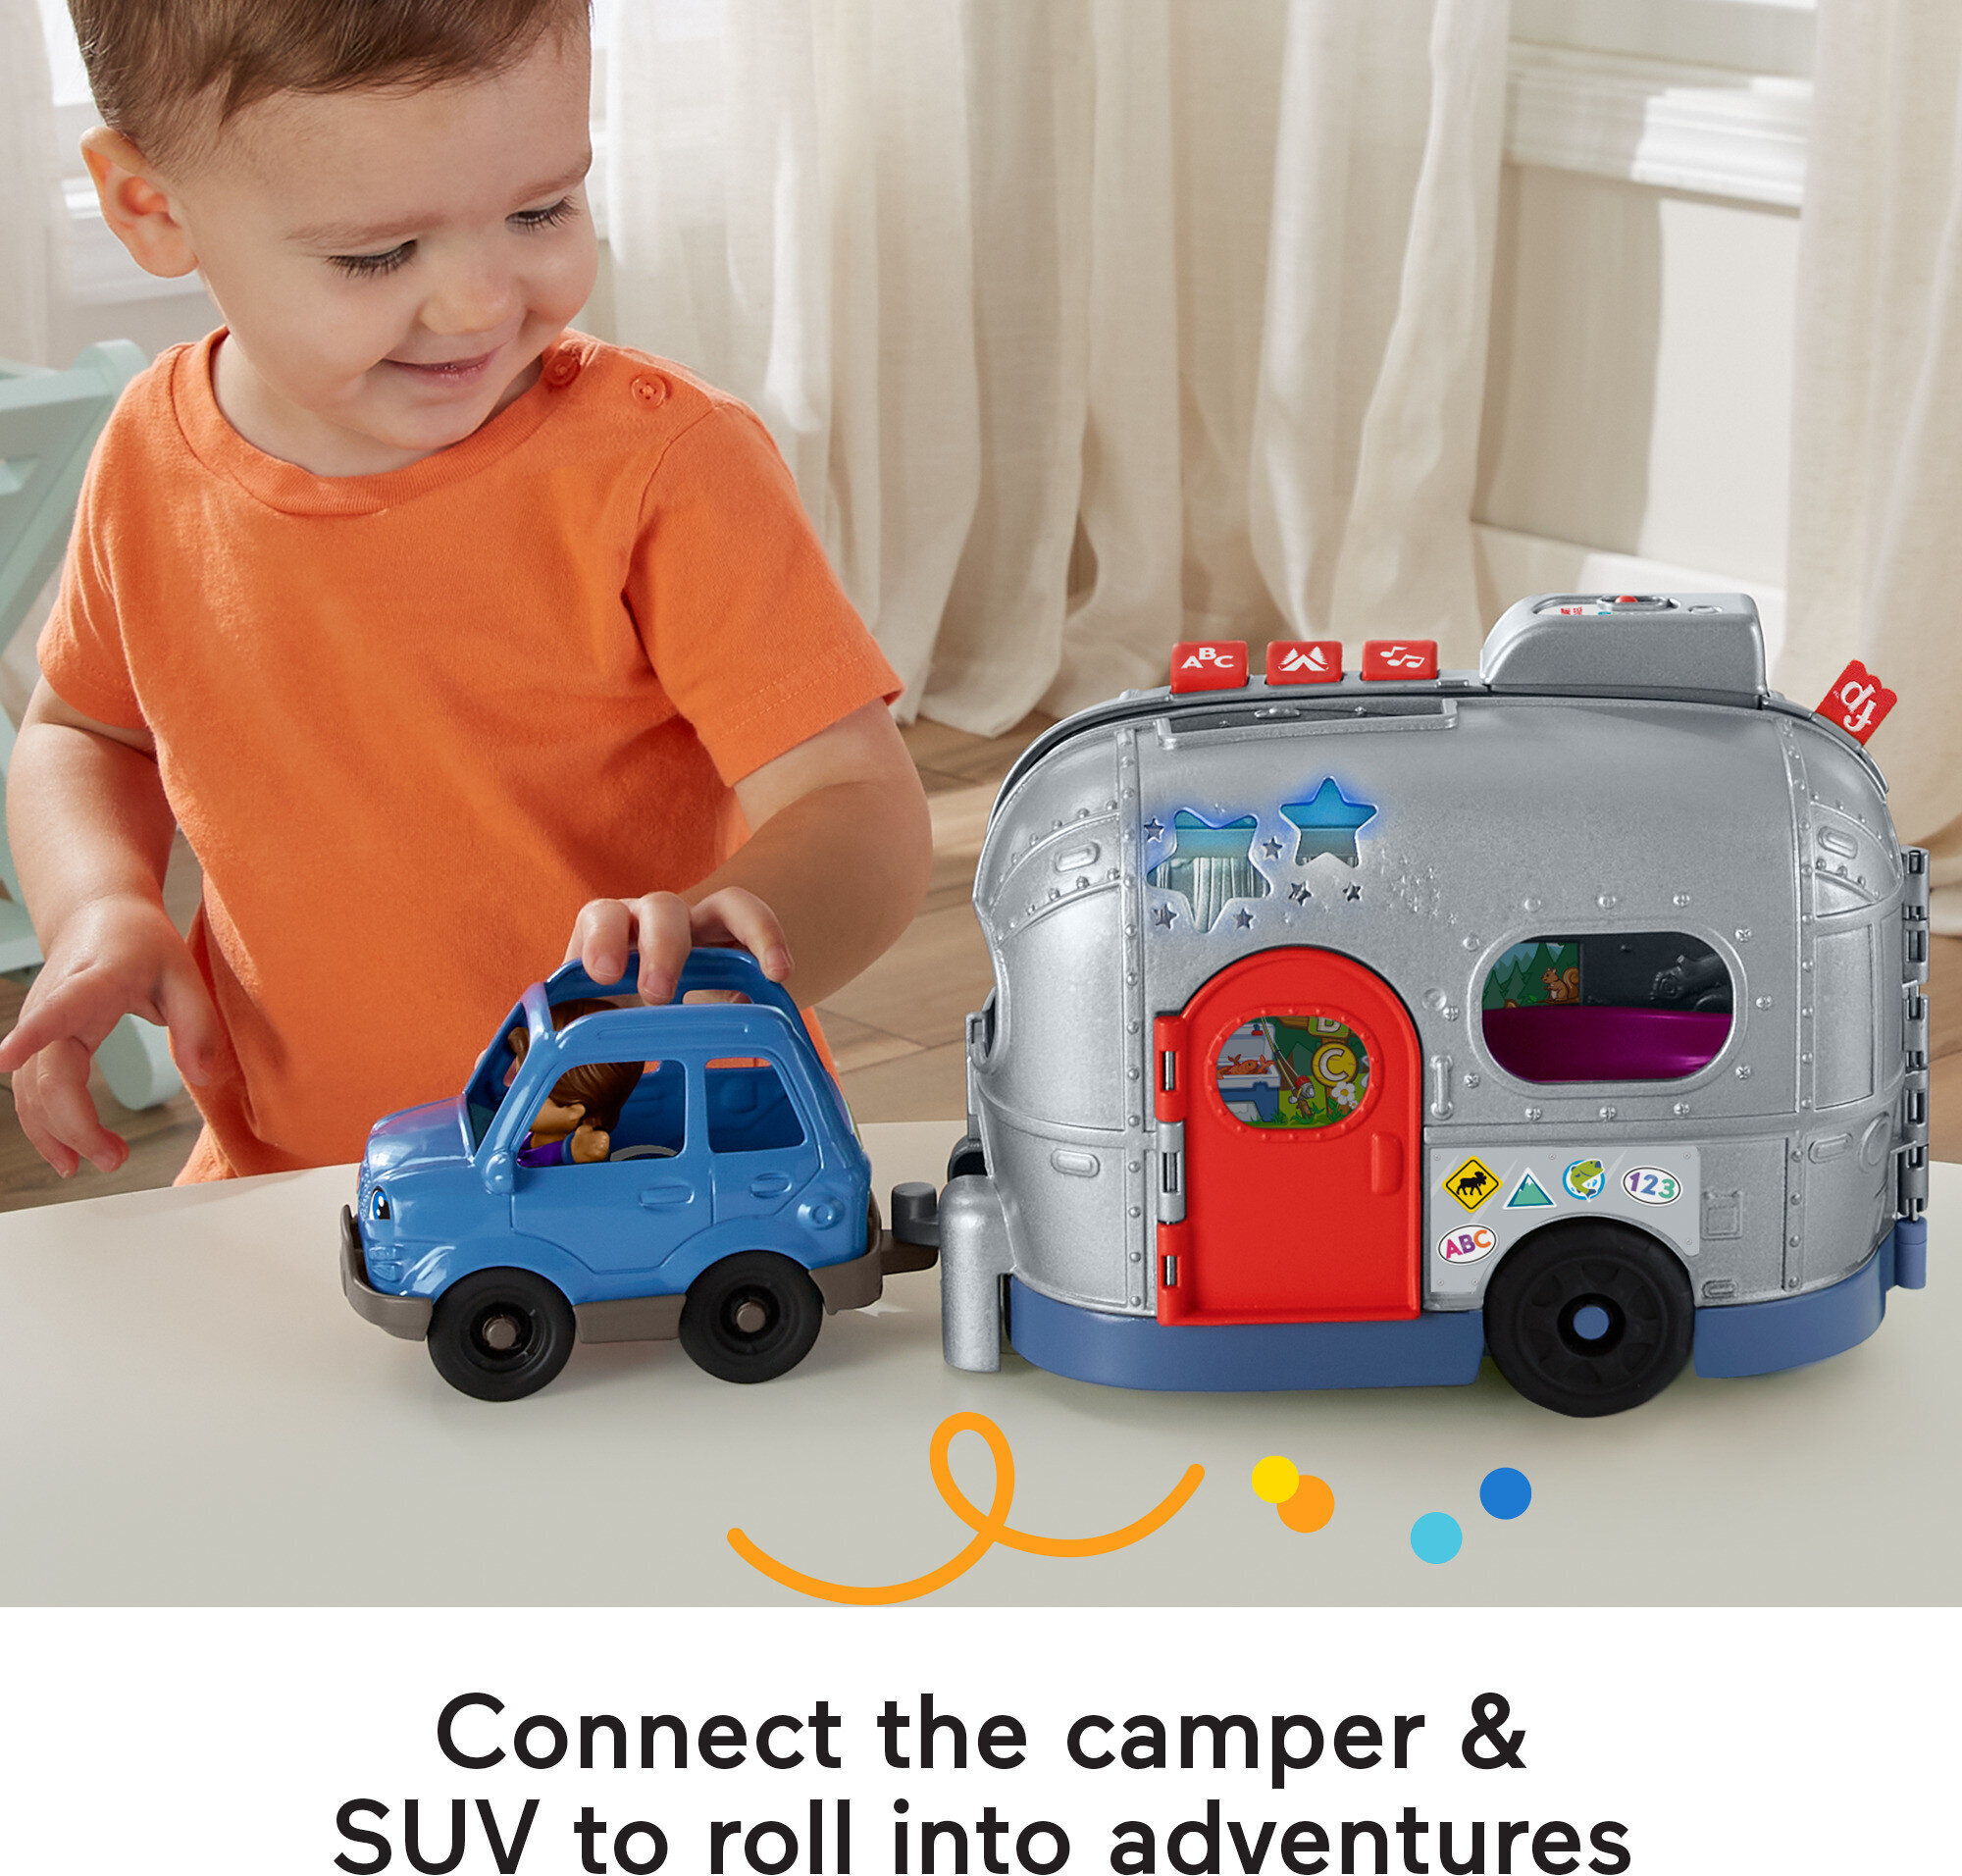 Fisher-Price Little People Light-up Learning Camper Electronic Toy RV for Toddlers, 8 Pieces - image 5 of 7